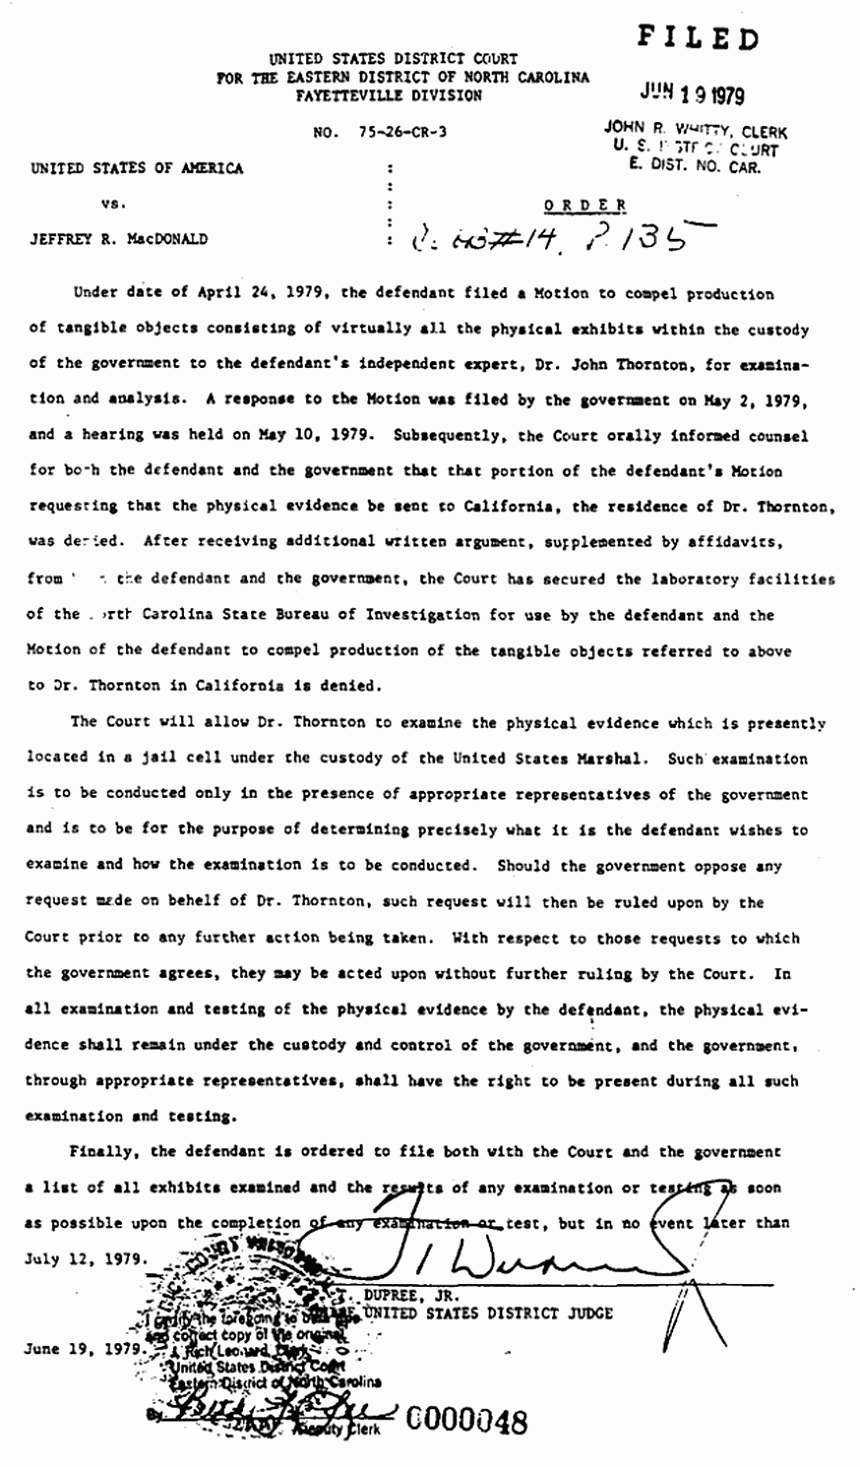 June 19, 1979: United States District Court, EDNC
Order re: Defense Motion to Compel Production of Tangible Objects